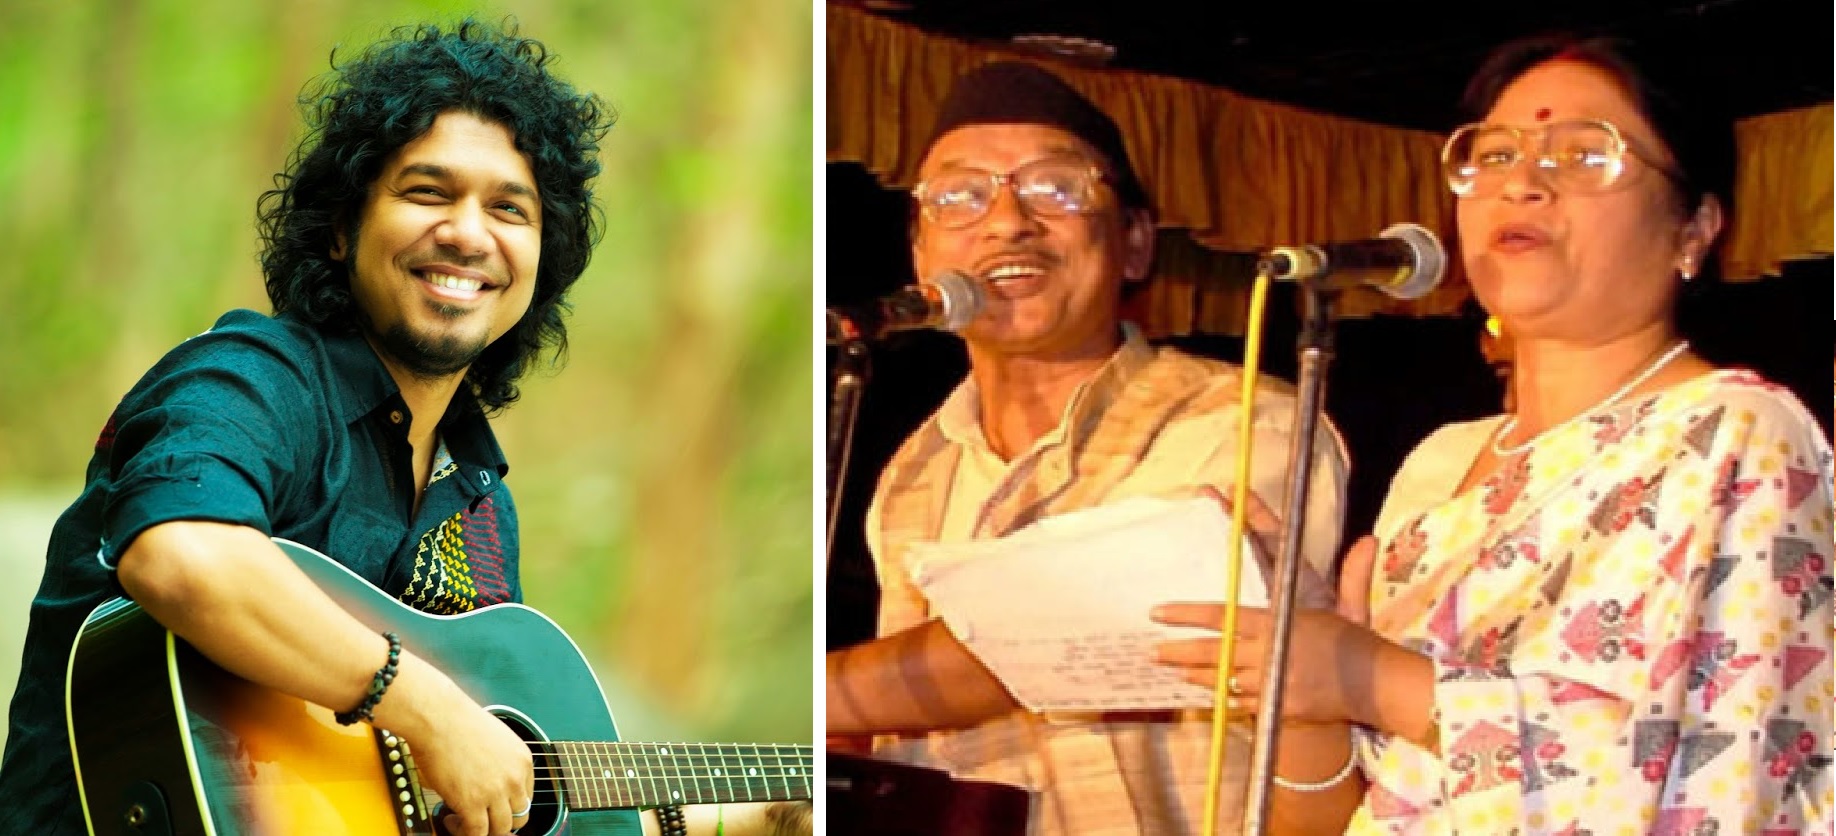 Archana Mahanta, Mother Of Singer Papon and Noted Assamese Singer Passes Away